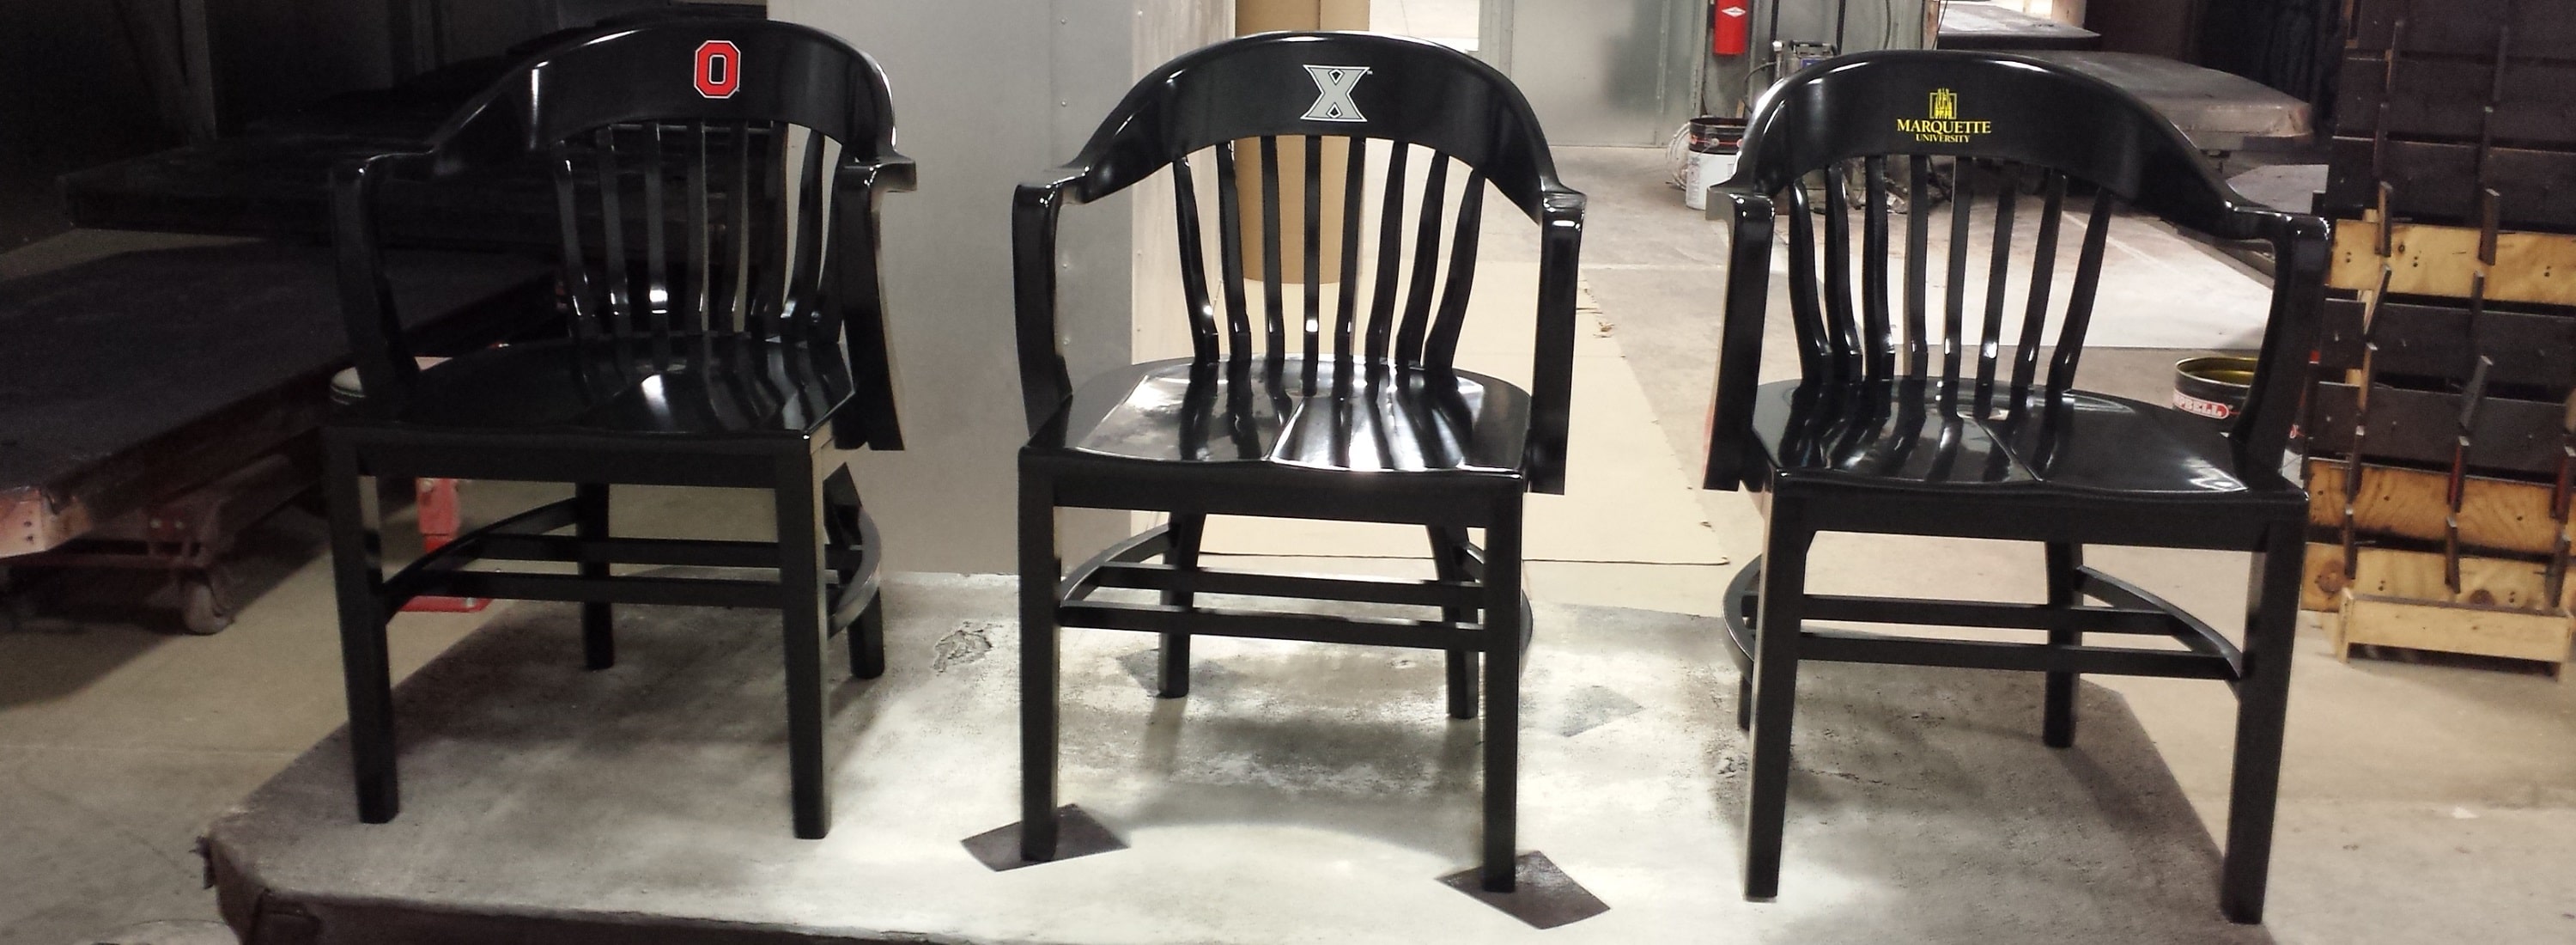 Examples of college chair finishes